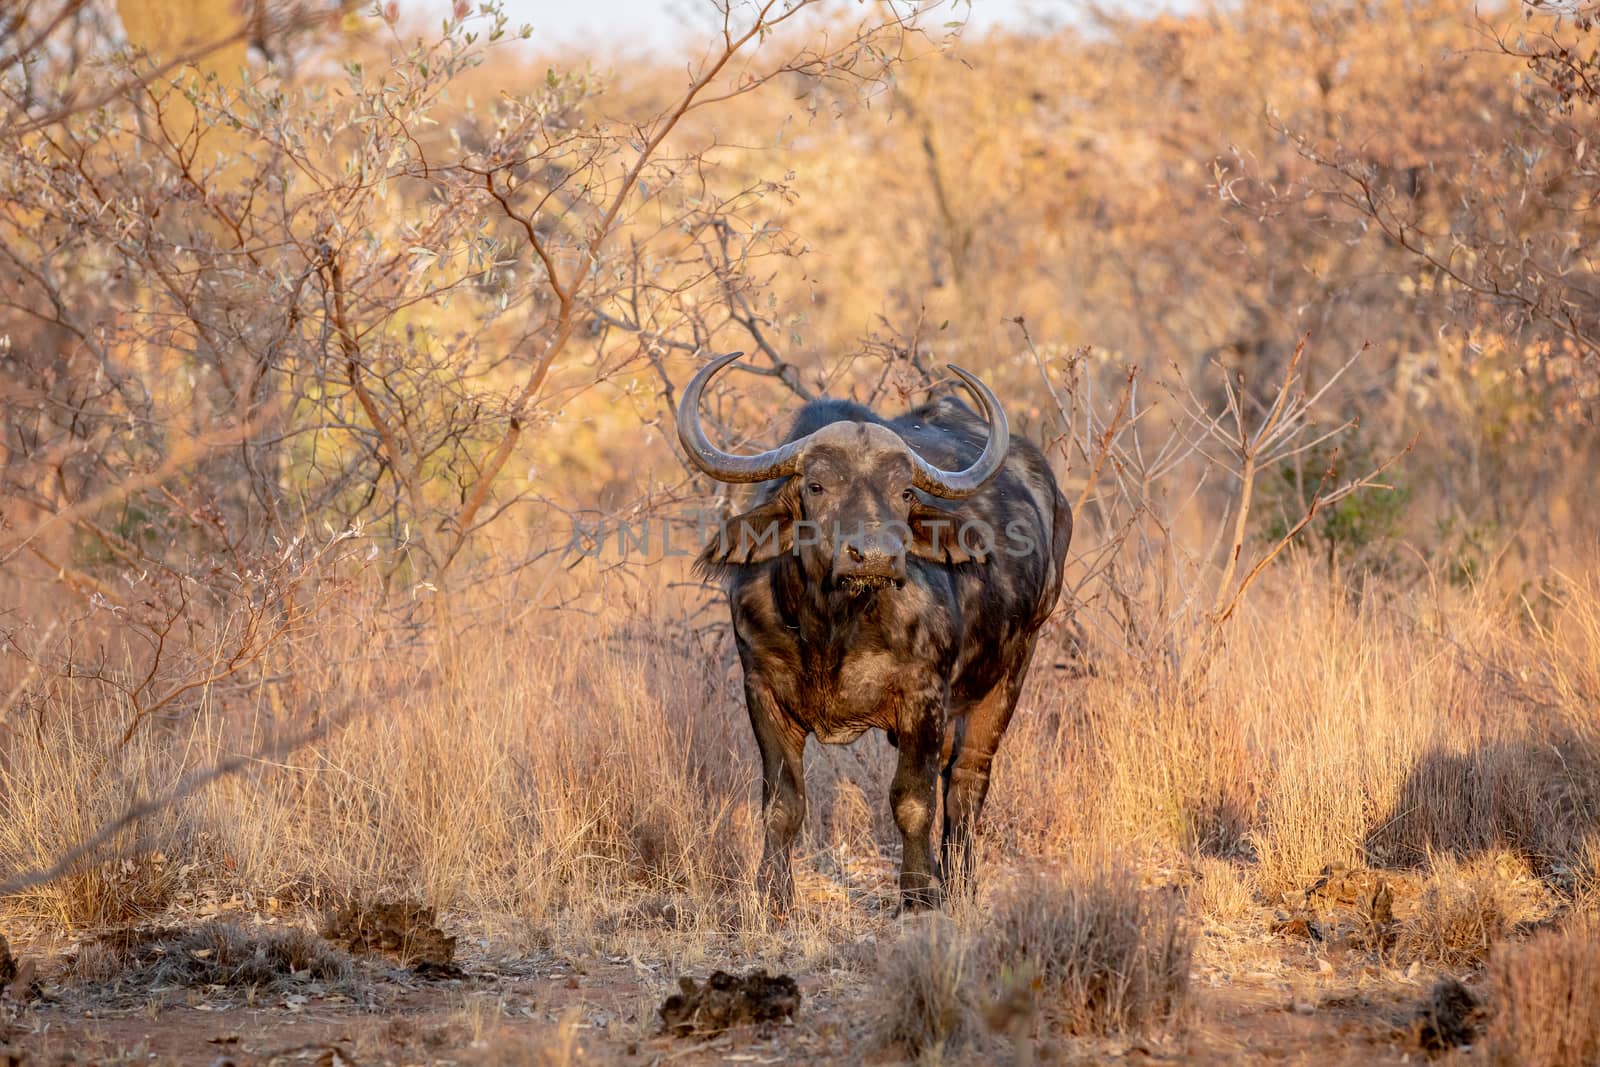 African buffalo starring at the camera in the Welgevonden game reserve, South Africa.